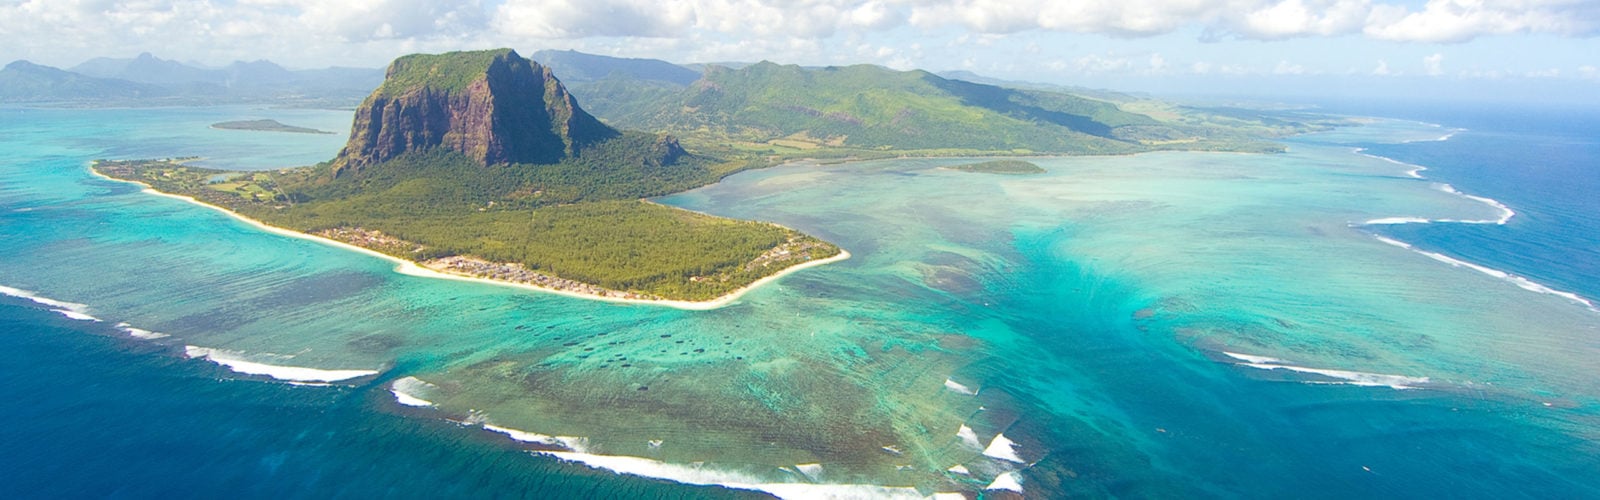 Aerial view of Mauritus